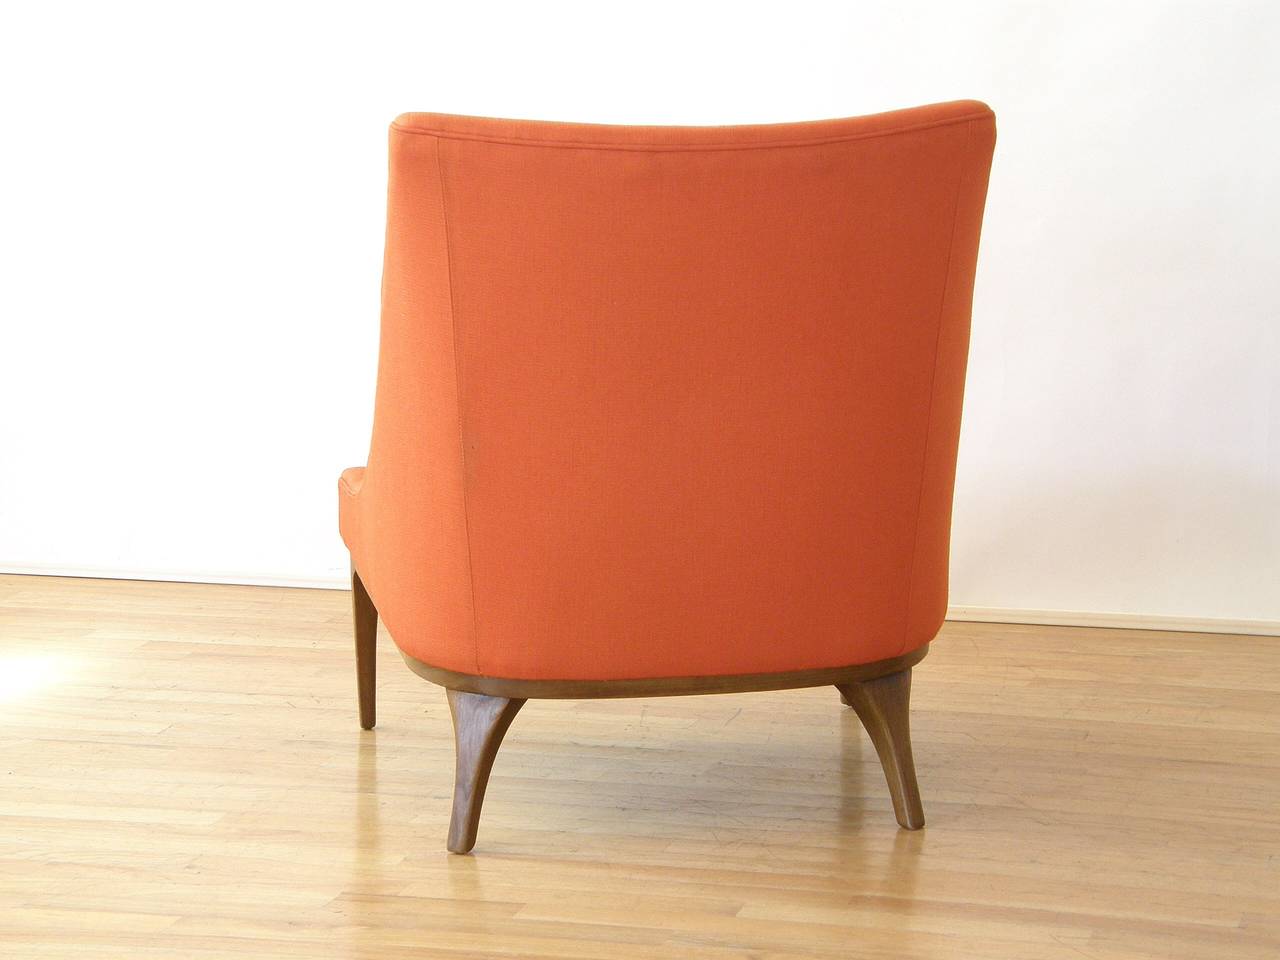 Slipper chair with curved sides designed by Lawrence Peabody.

Please use Contact Dealer button if you have any questions.